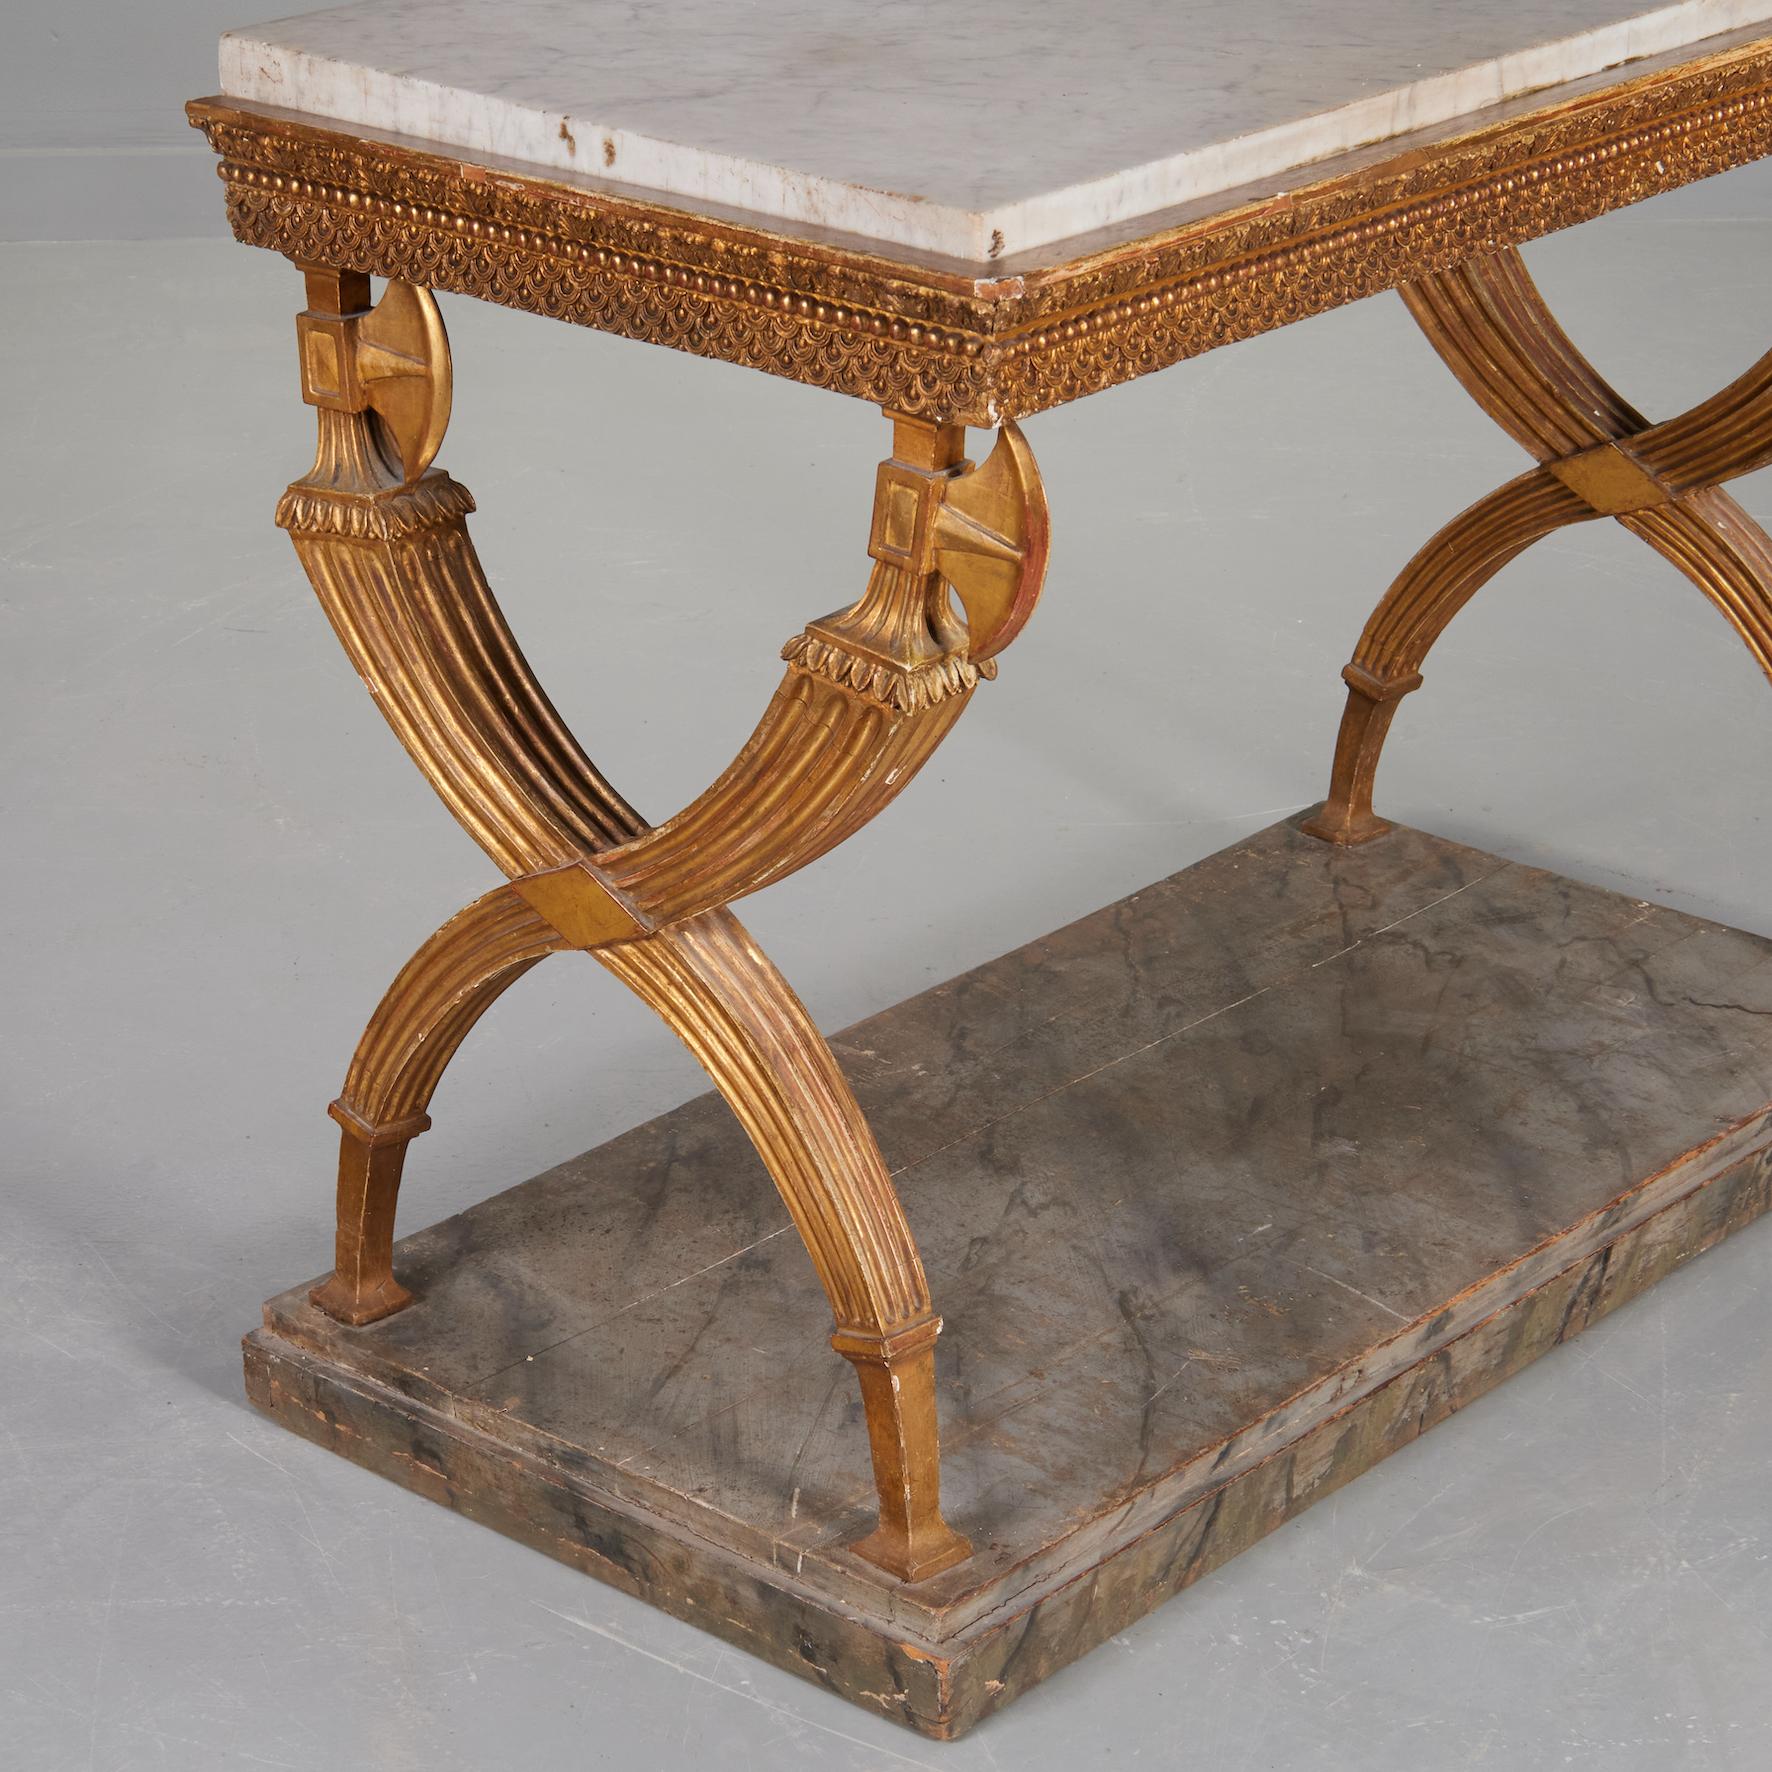 Early 19th Century Elegant Swedish Gilt Wood Neoclassical Console Table with Marble Top For Sale